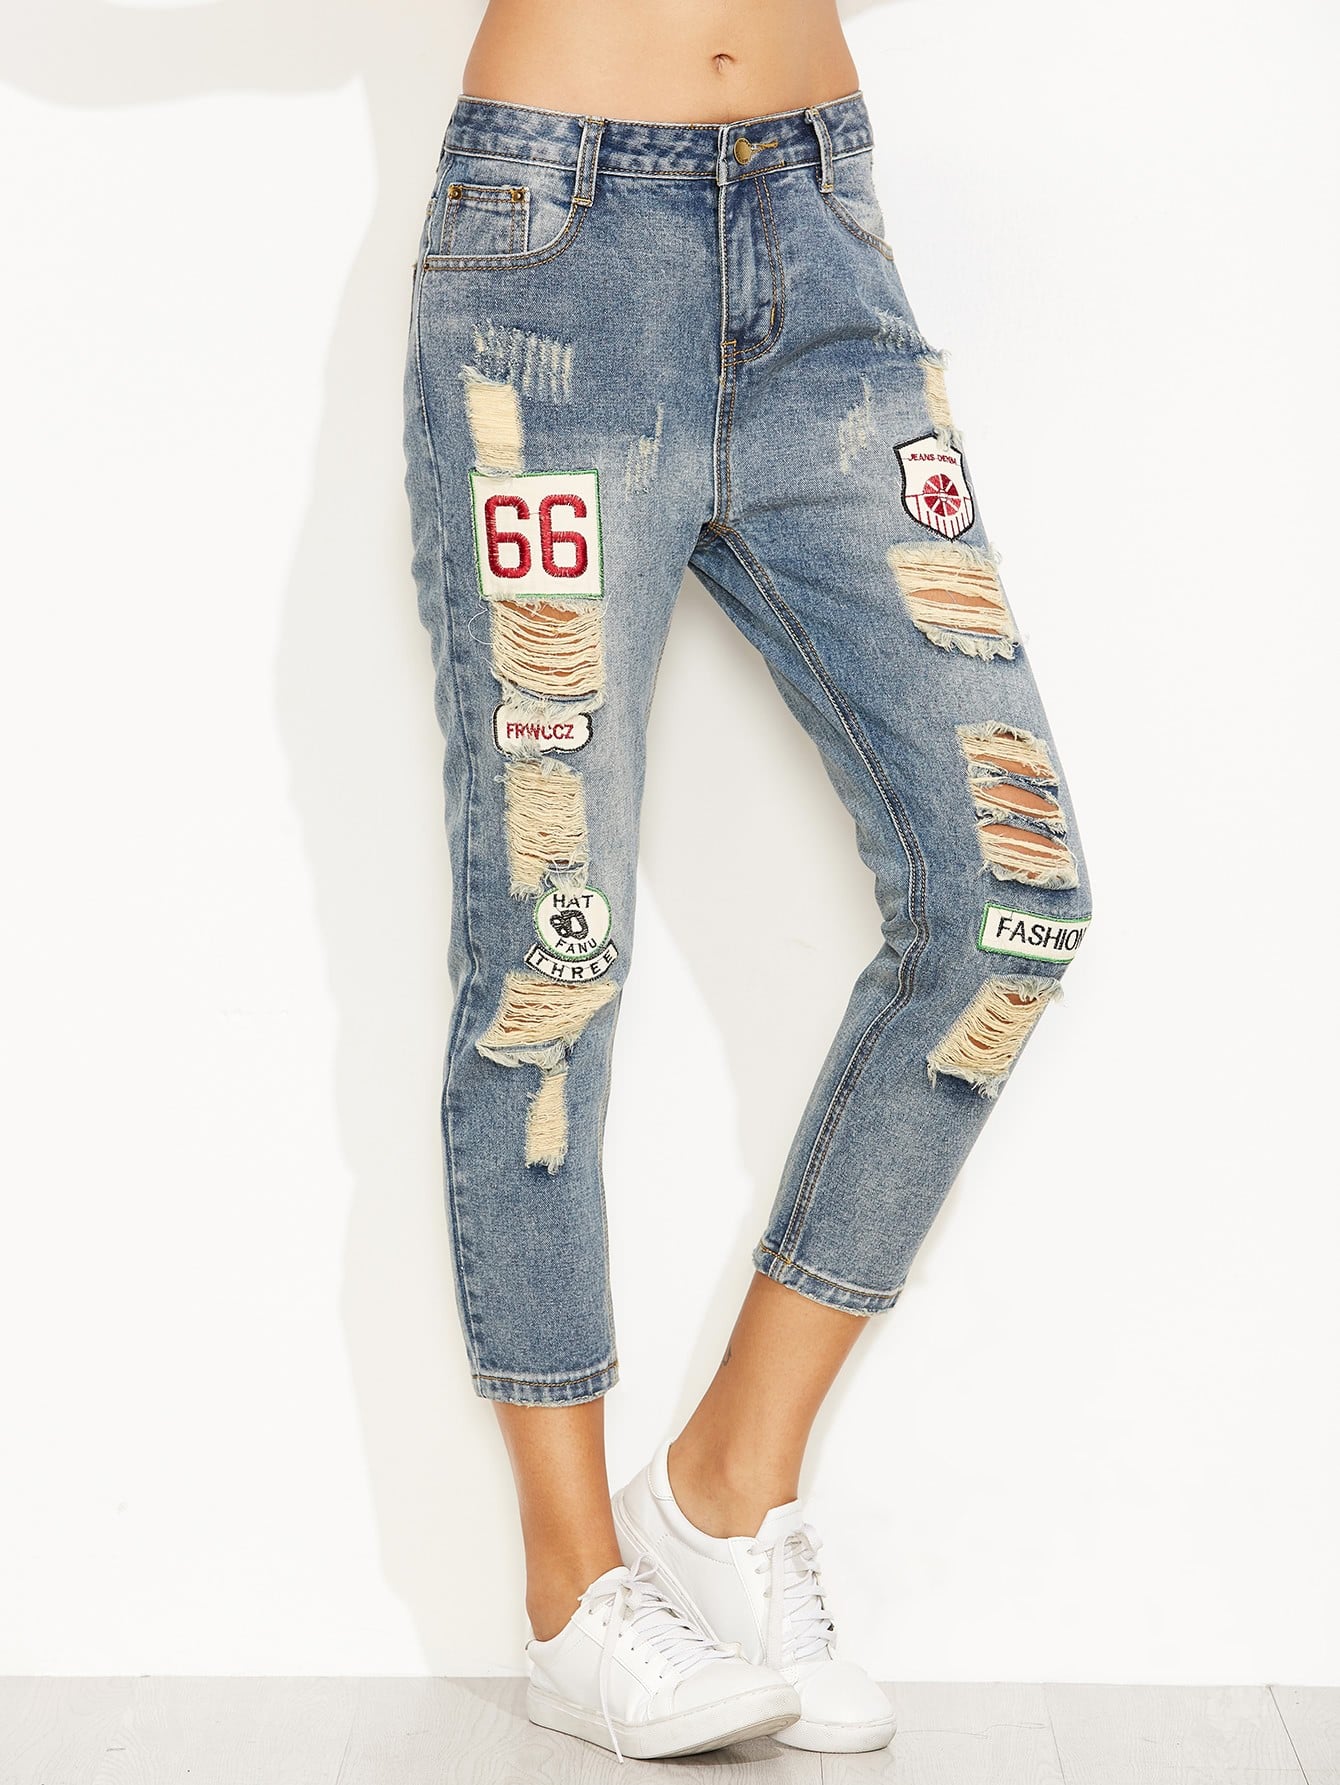 Mesh Patchwork Jeans Women Pacthed Jeans High Waisted Jeans 